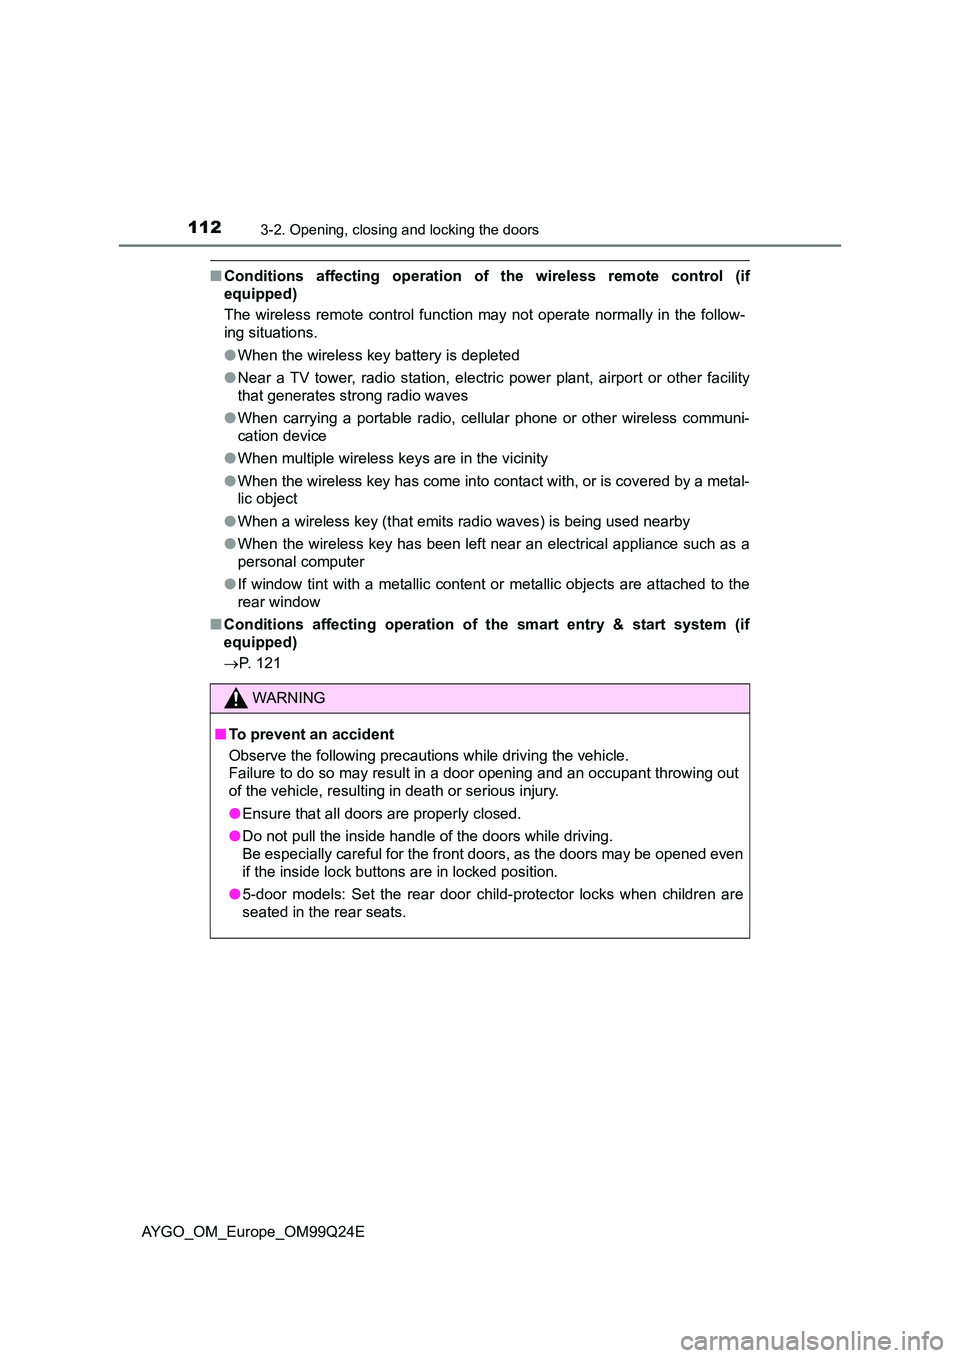 TOYOTA AYGO 2017  Owners Manual (in English) 1123-2. Opening, closing and locking the doors
AYGO_OM_Europe_OM99Q24E
■Conditions affecting operation of the wireless remote control (if 
equipped)  
The wireless remote control function may not op